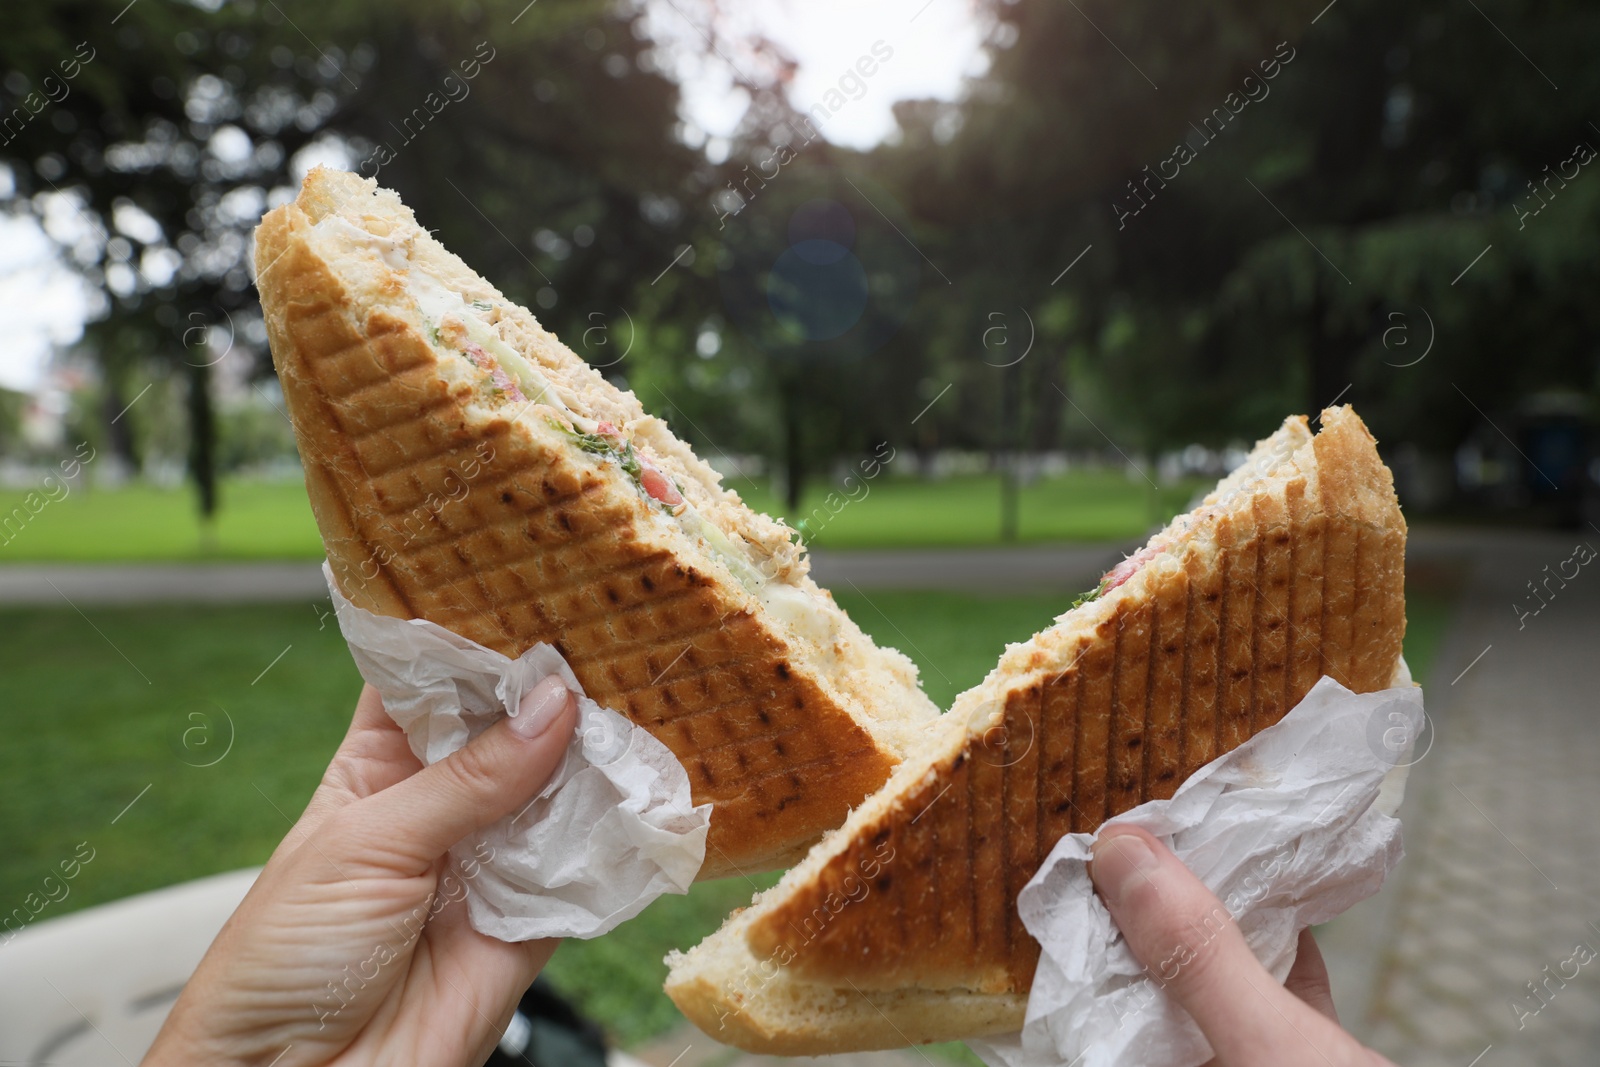 Photo of Man and woman holding delicious sandwiches outdoors, closeup. Street food